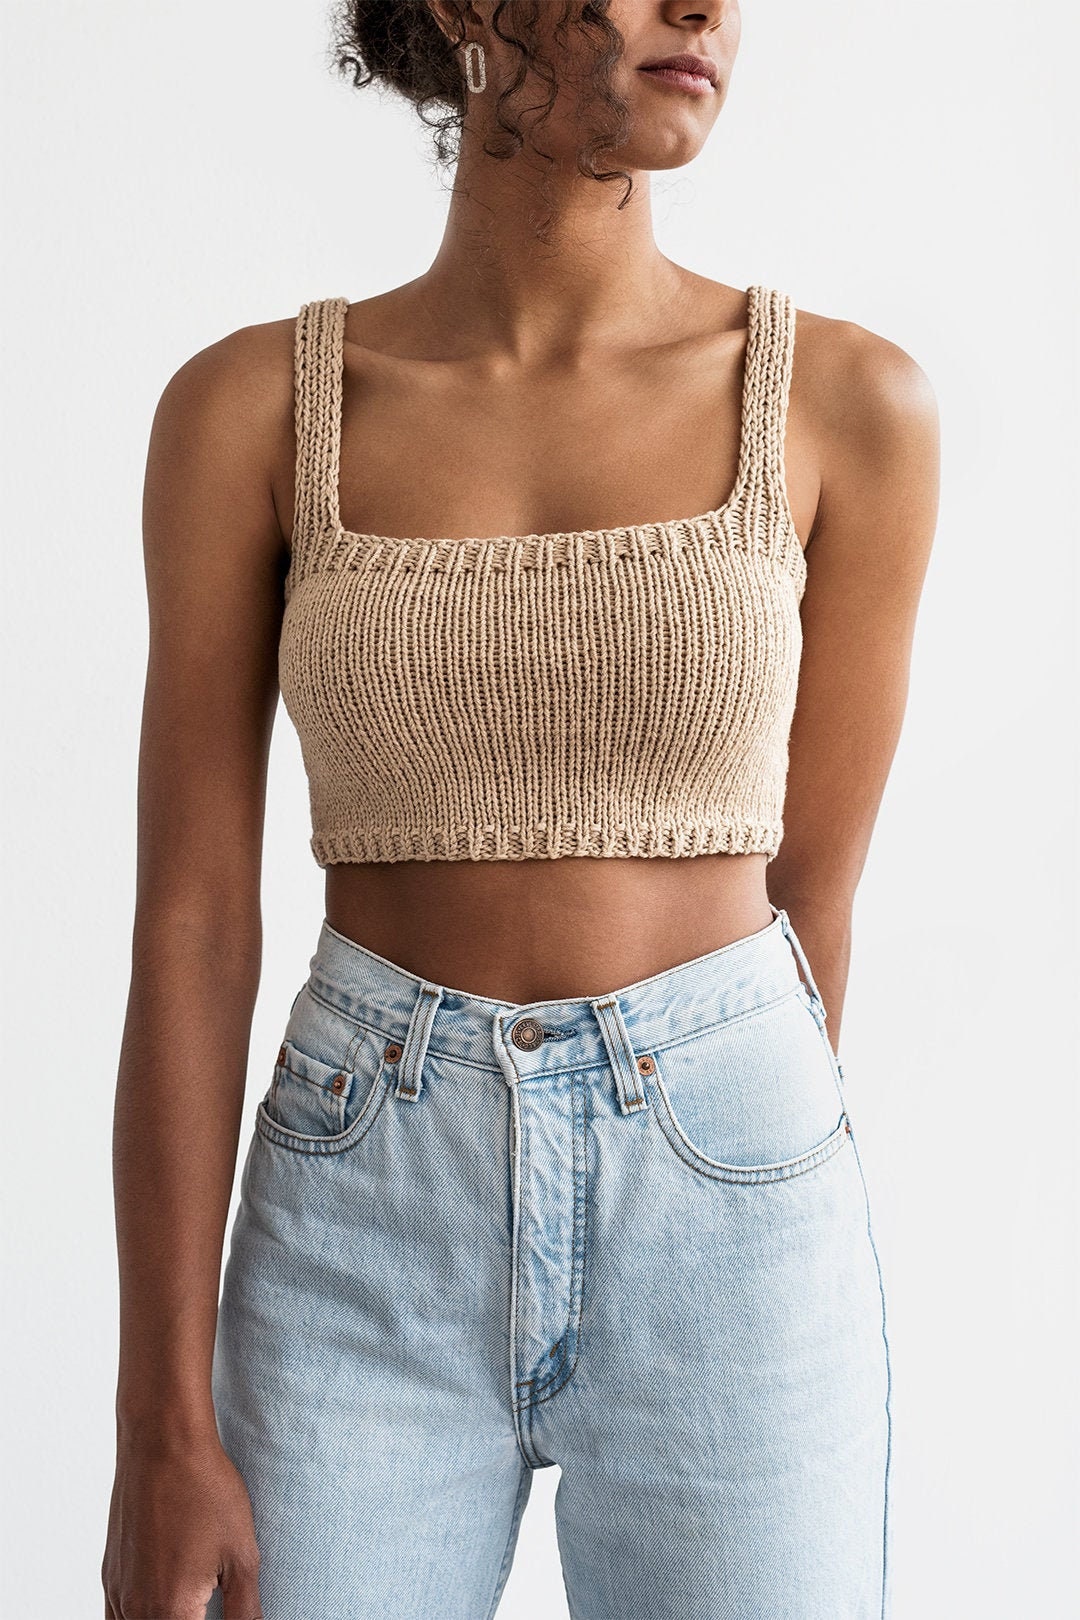 Square Neck Crop Top Minimal Knit Top Cropped Yoga Top Hand - Etsy